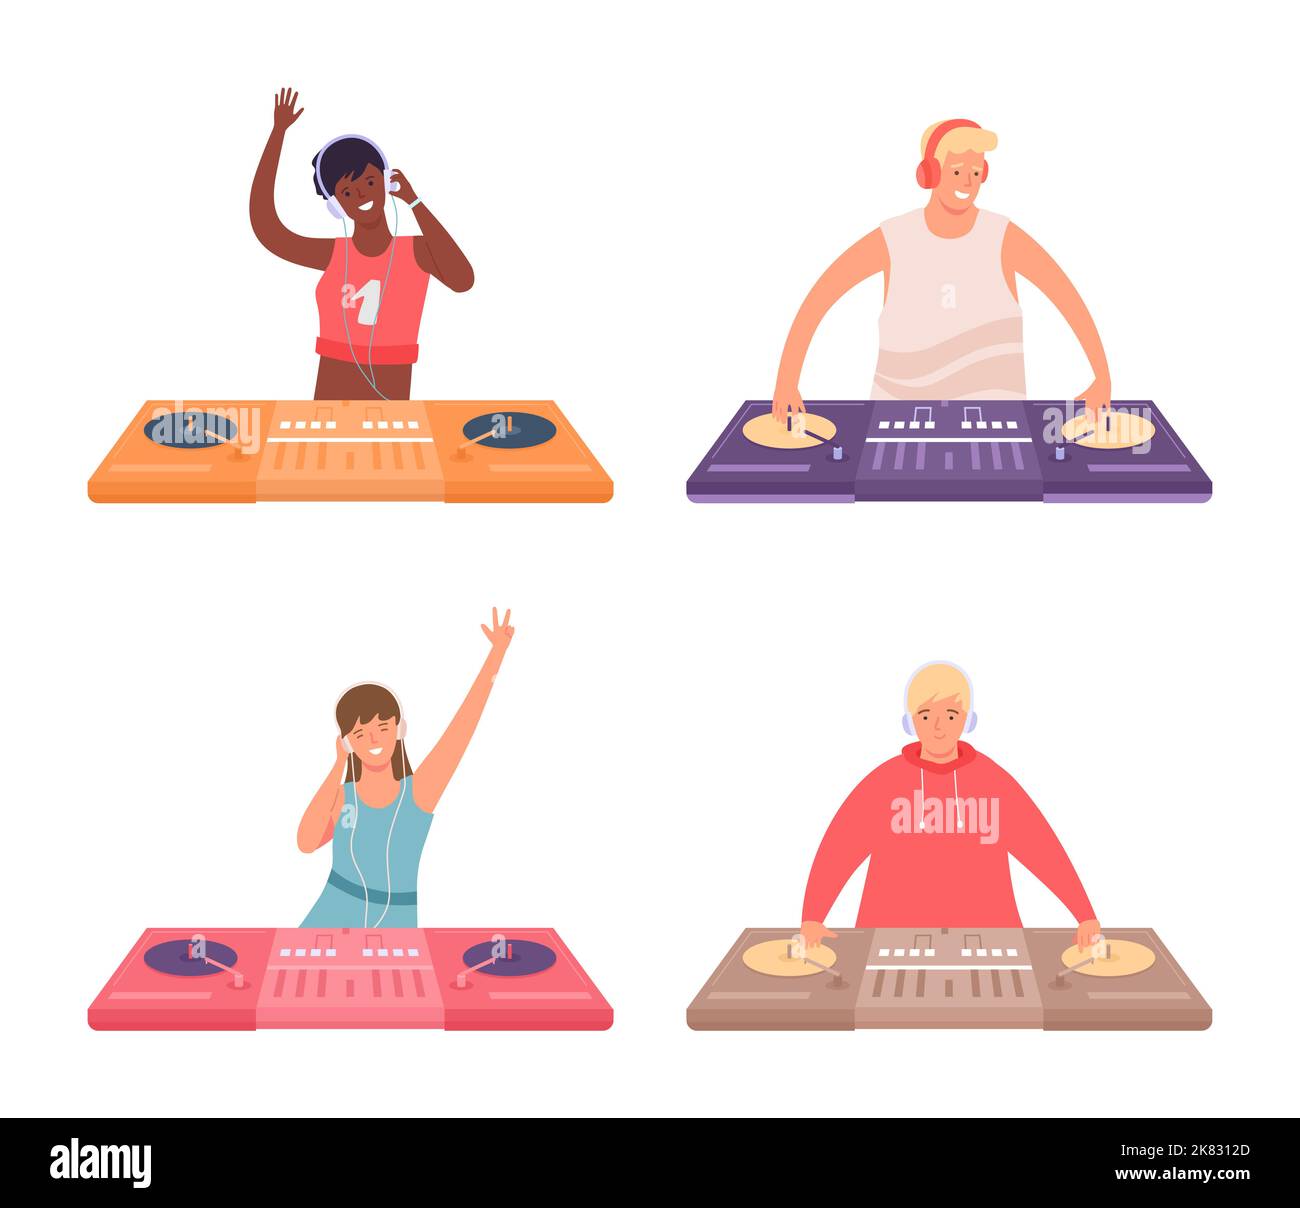 Dj characters at console. Woman and man musicians in headphones playing music at party. Female and male characters Stock Vector